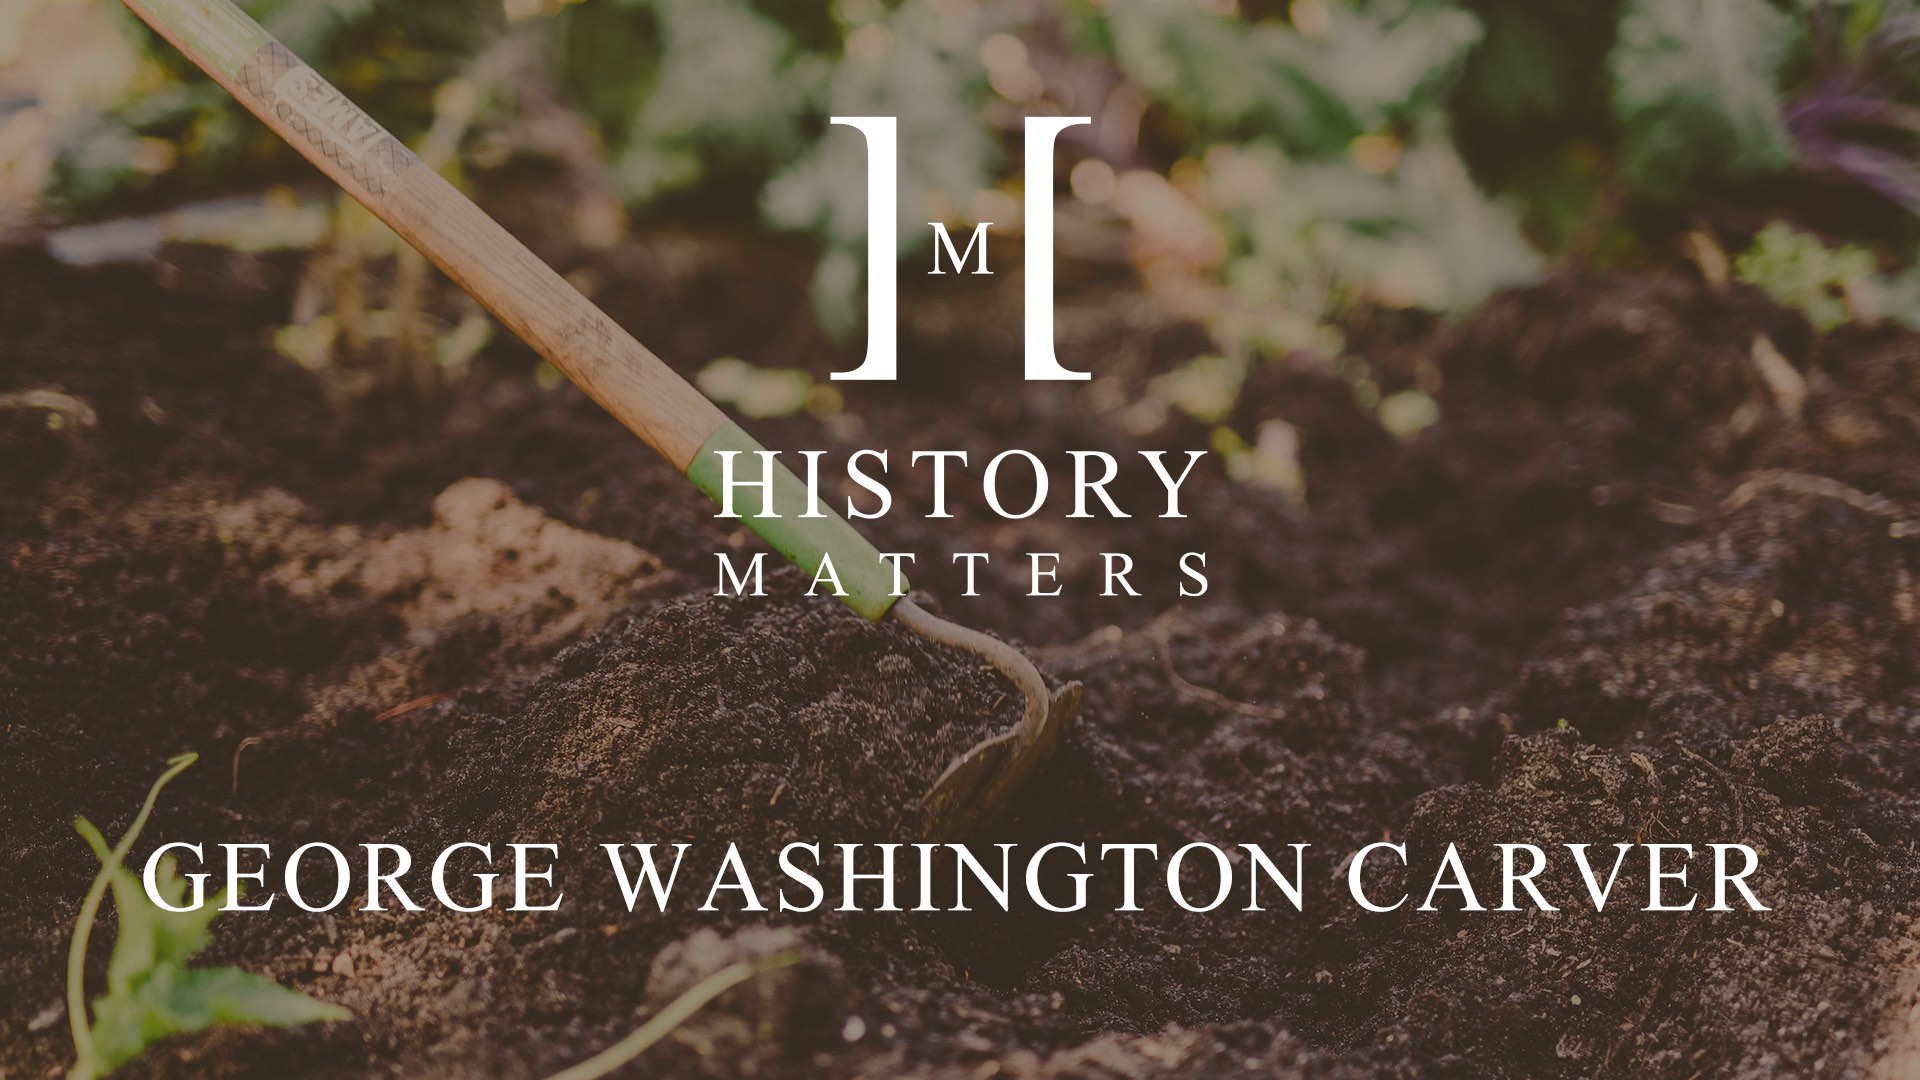 IU C&I Studios Page White HM George Washington Carver logo with background showing a hoe being used in dirt in a garden